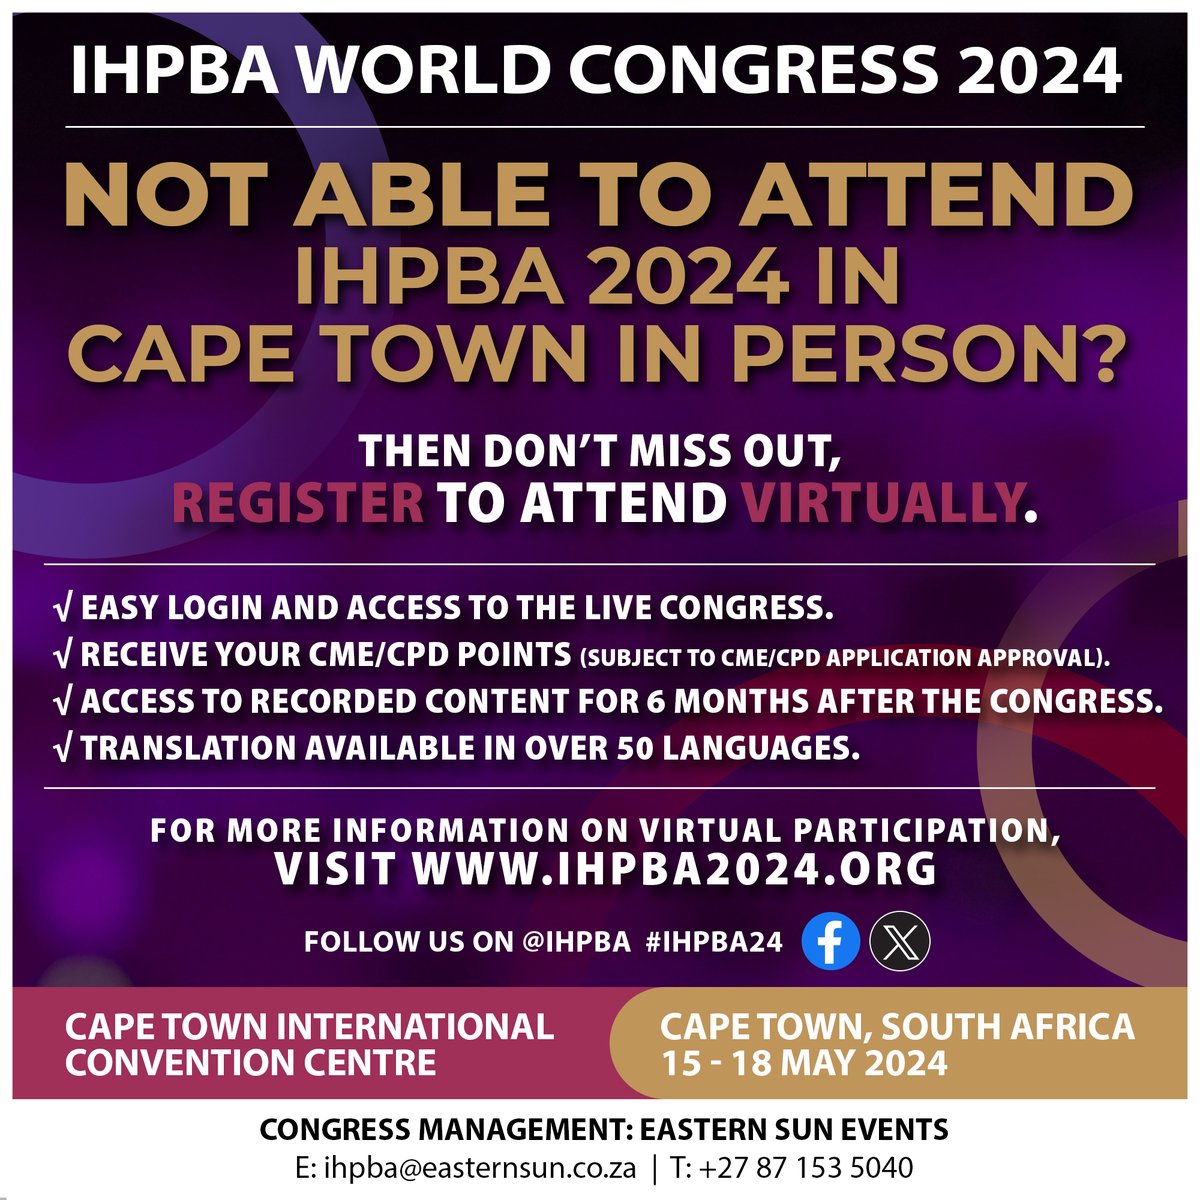 Can't make it to the IHPBA 2024 World Congress in person? Join us virtually and gain access to all the insights, innovation and networking from the comfort of your own space. We're offering virtual translation, ensuring a seamless experience. To register: ihpba2024.org